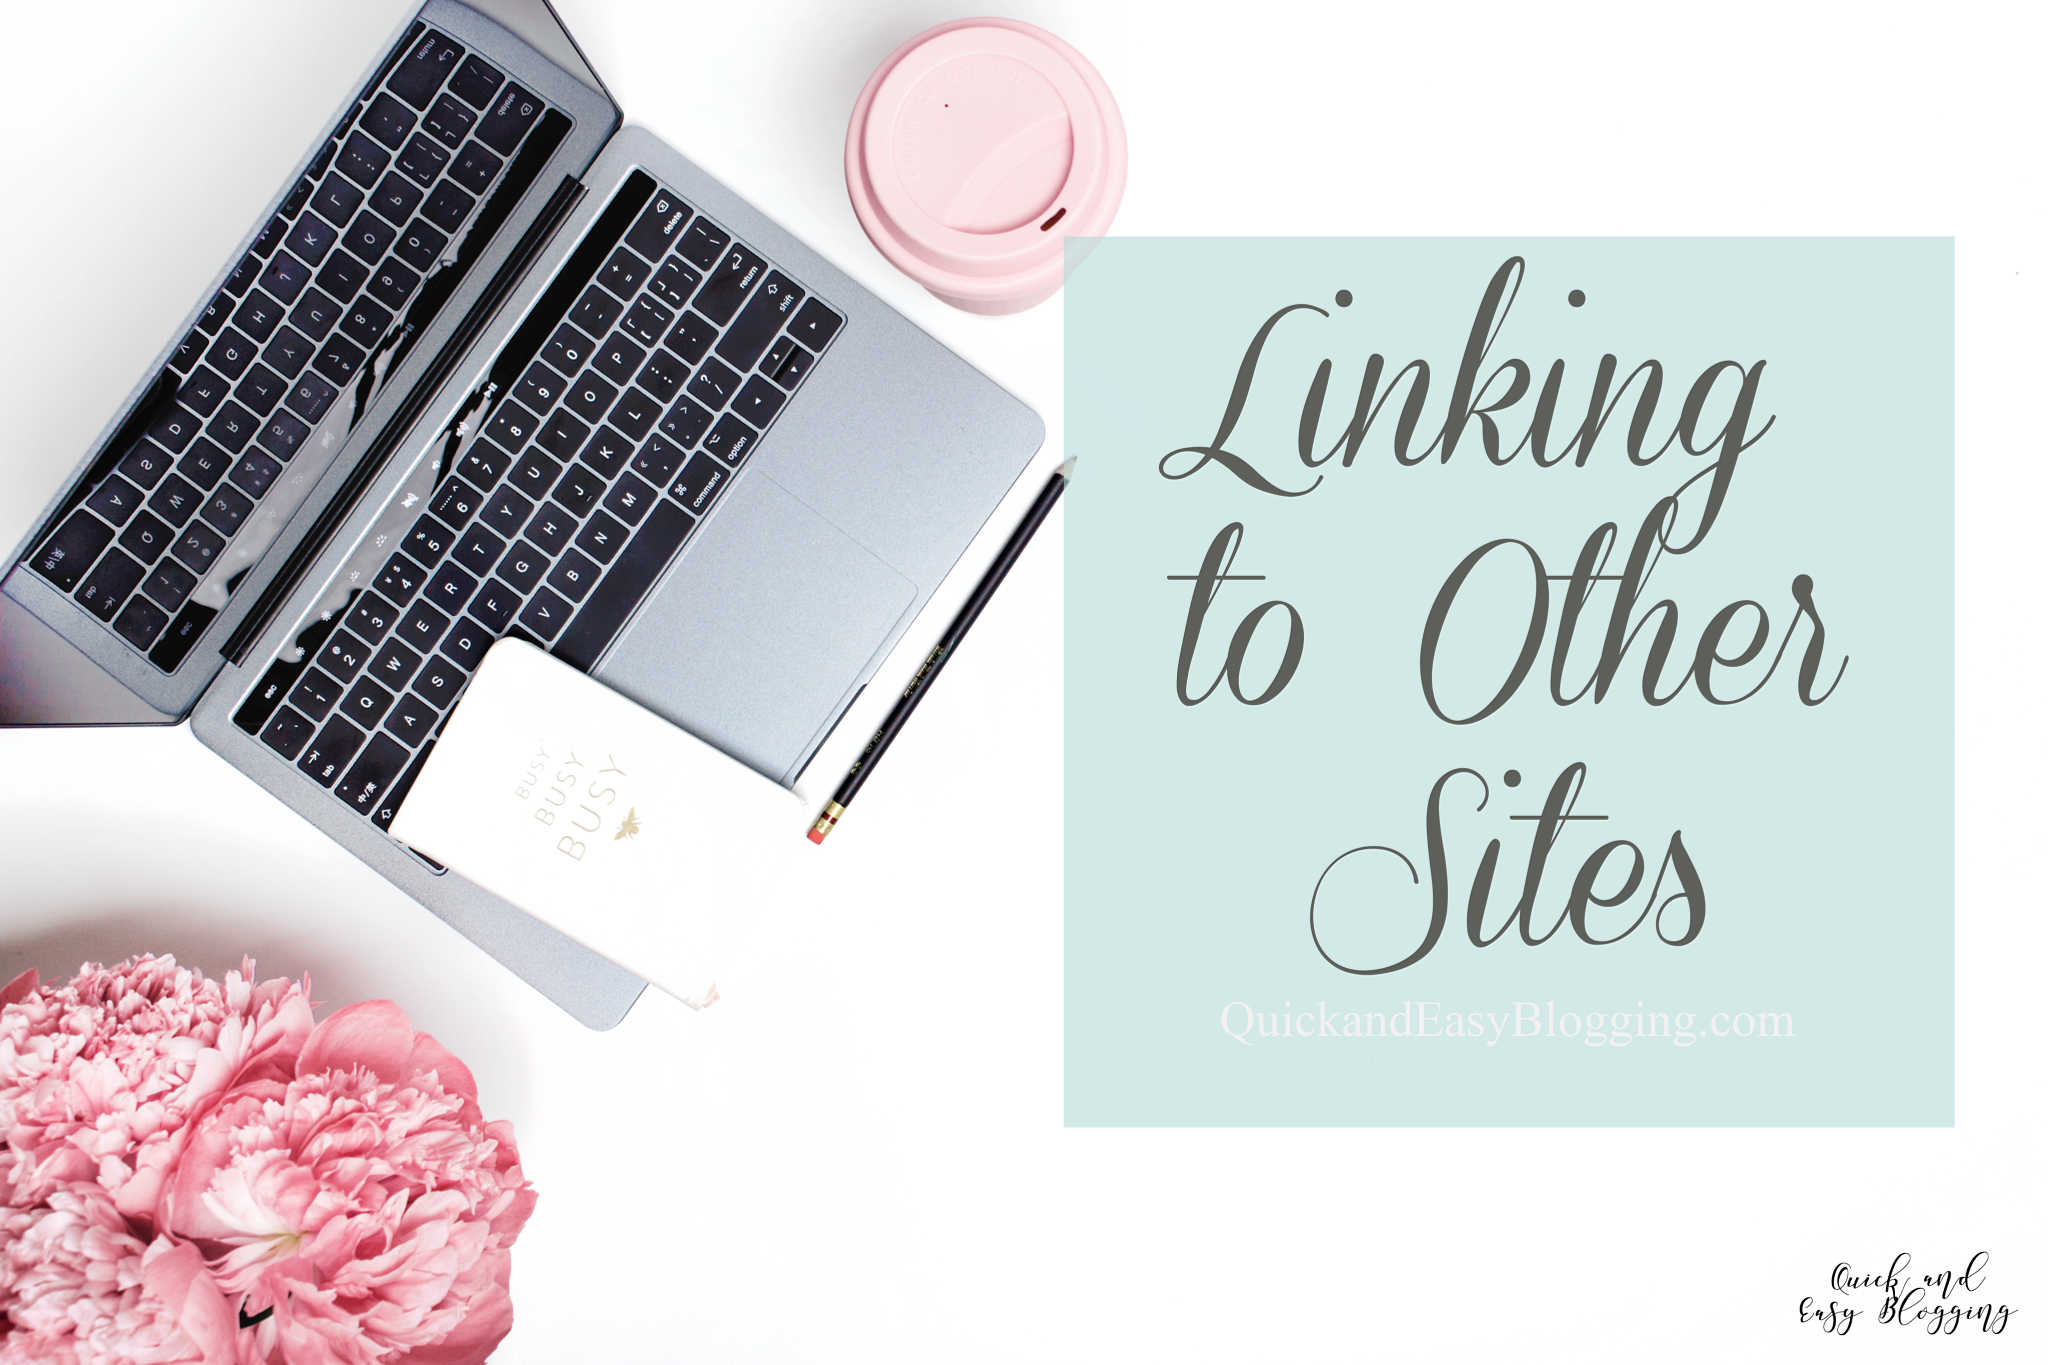 We're covering the topic of outbound links on Quick and Easy Blogging. Don't Be Afraid To Link to Other Sites #blogtips